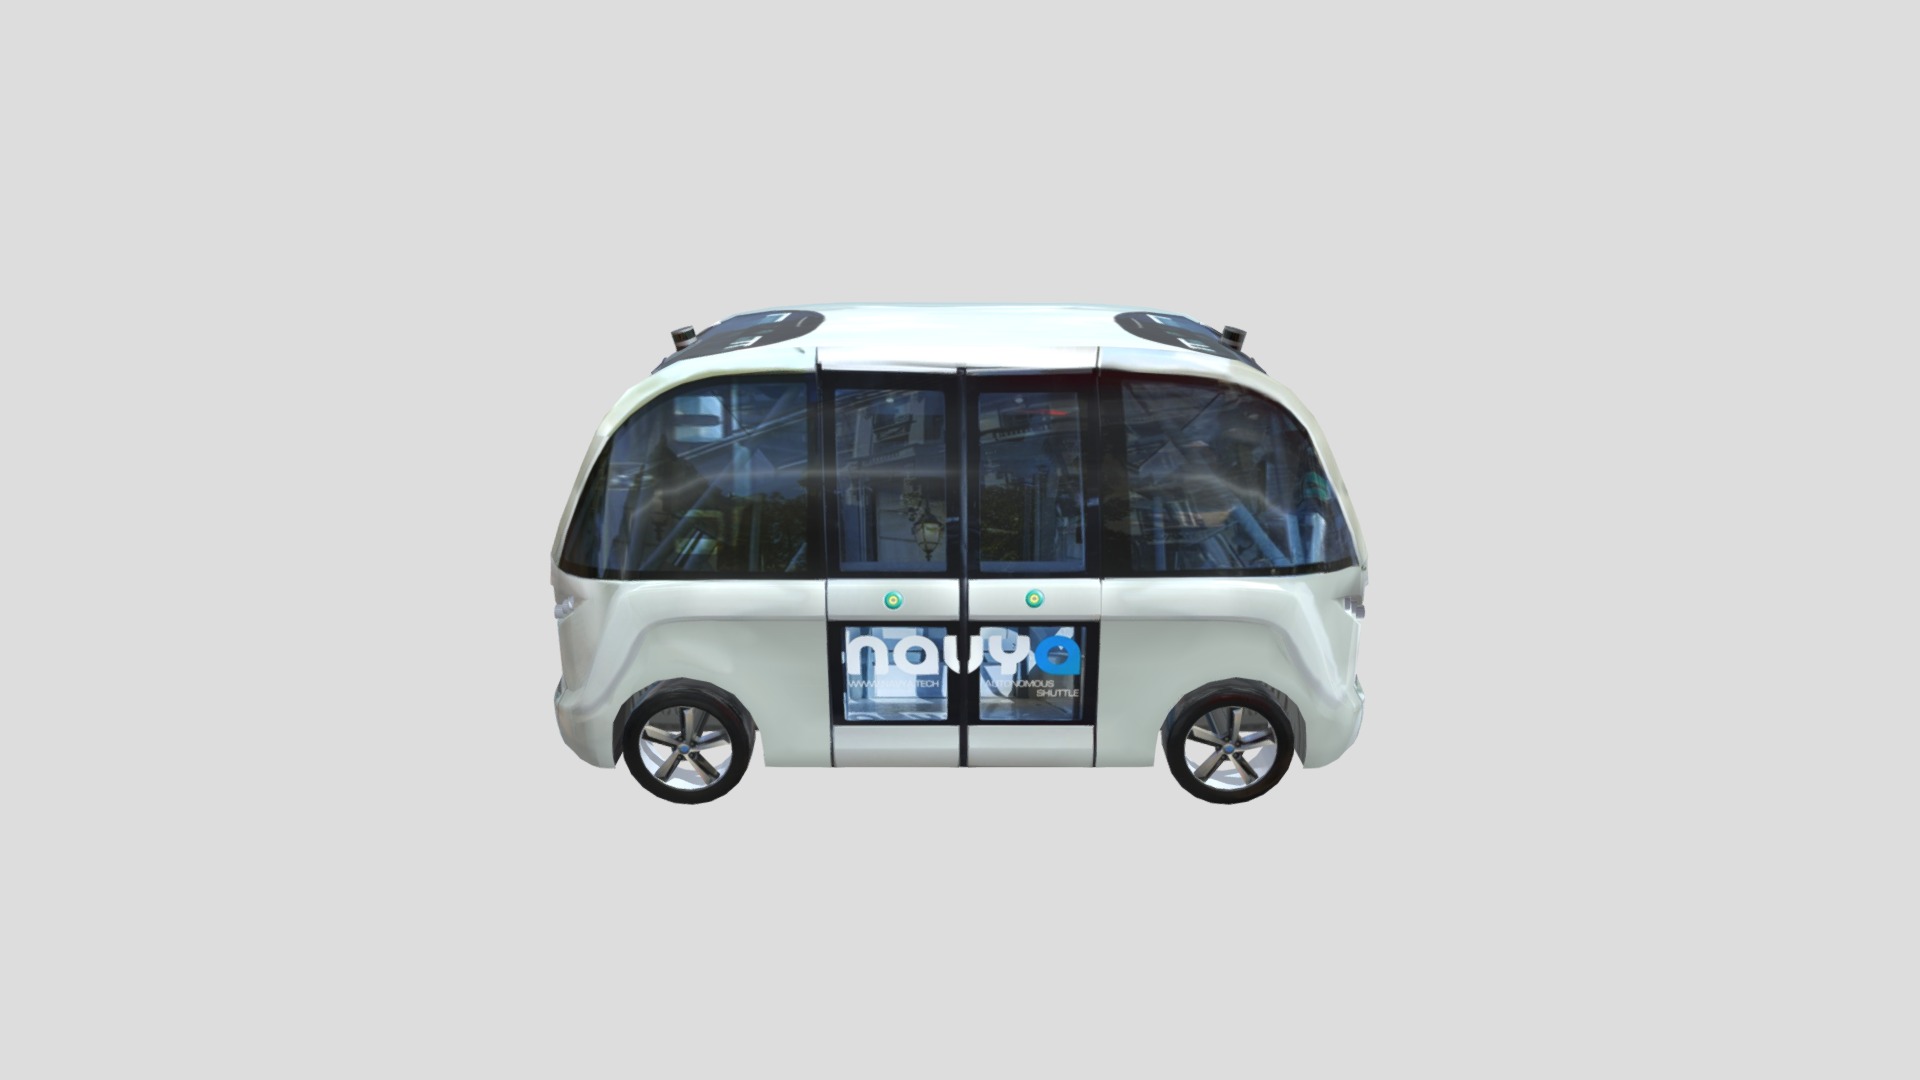 3D model Navya Arma self-driving vehicle - This is a 3D model of the Navya Arma self-driving vehicle. The 3D model is about a small white and black bus.